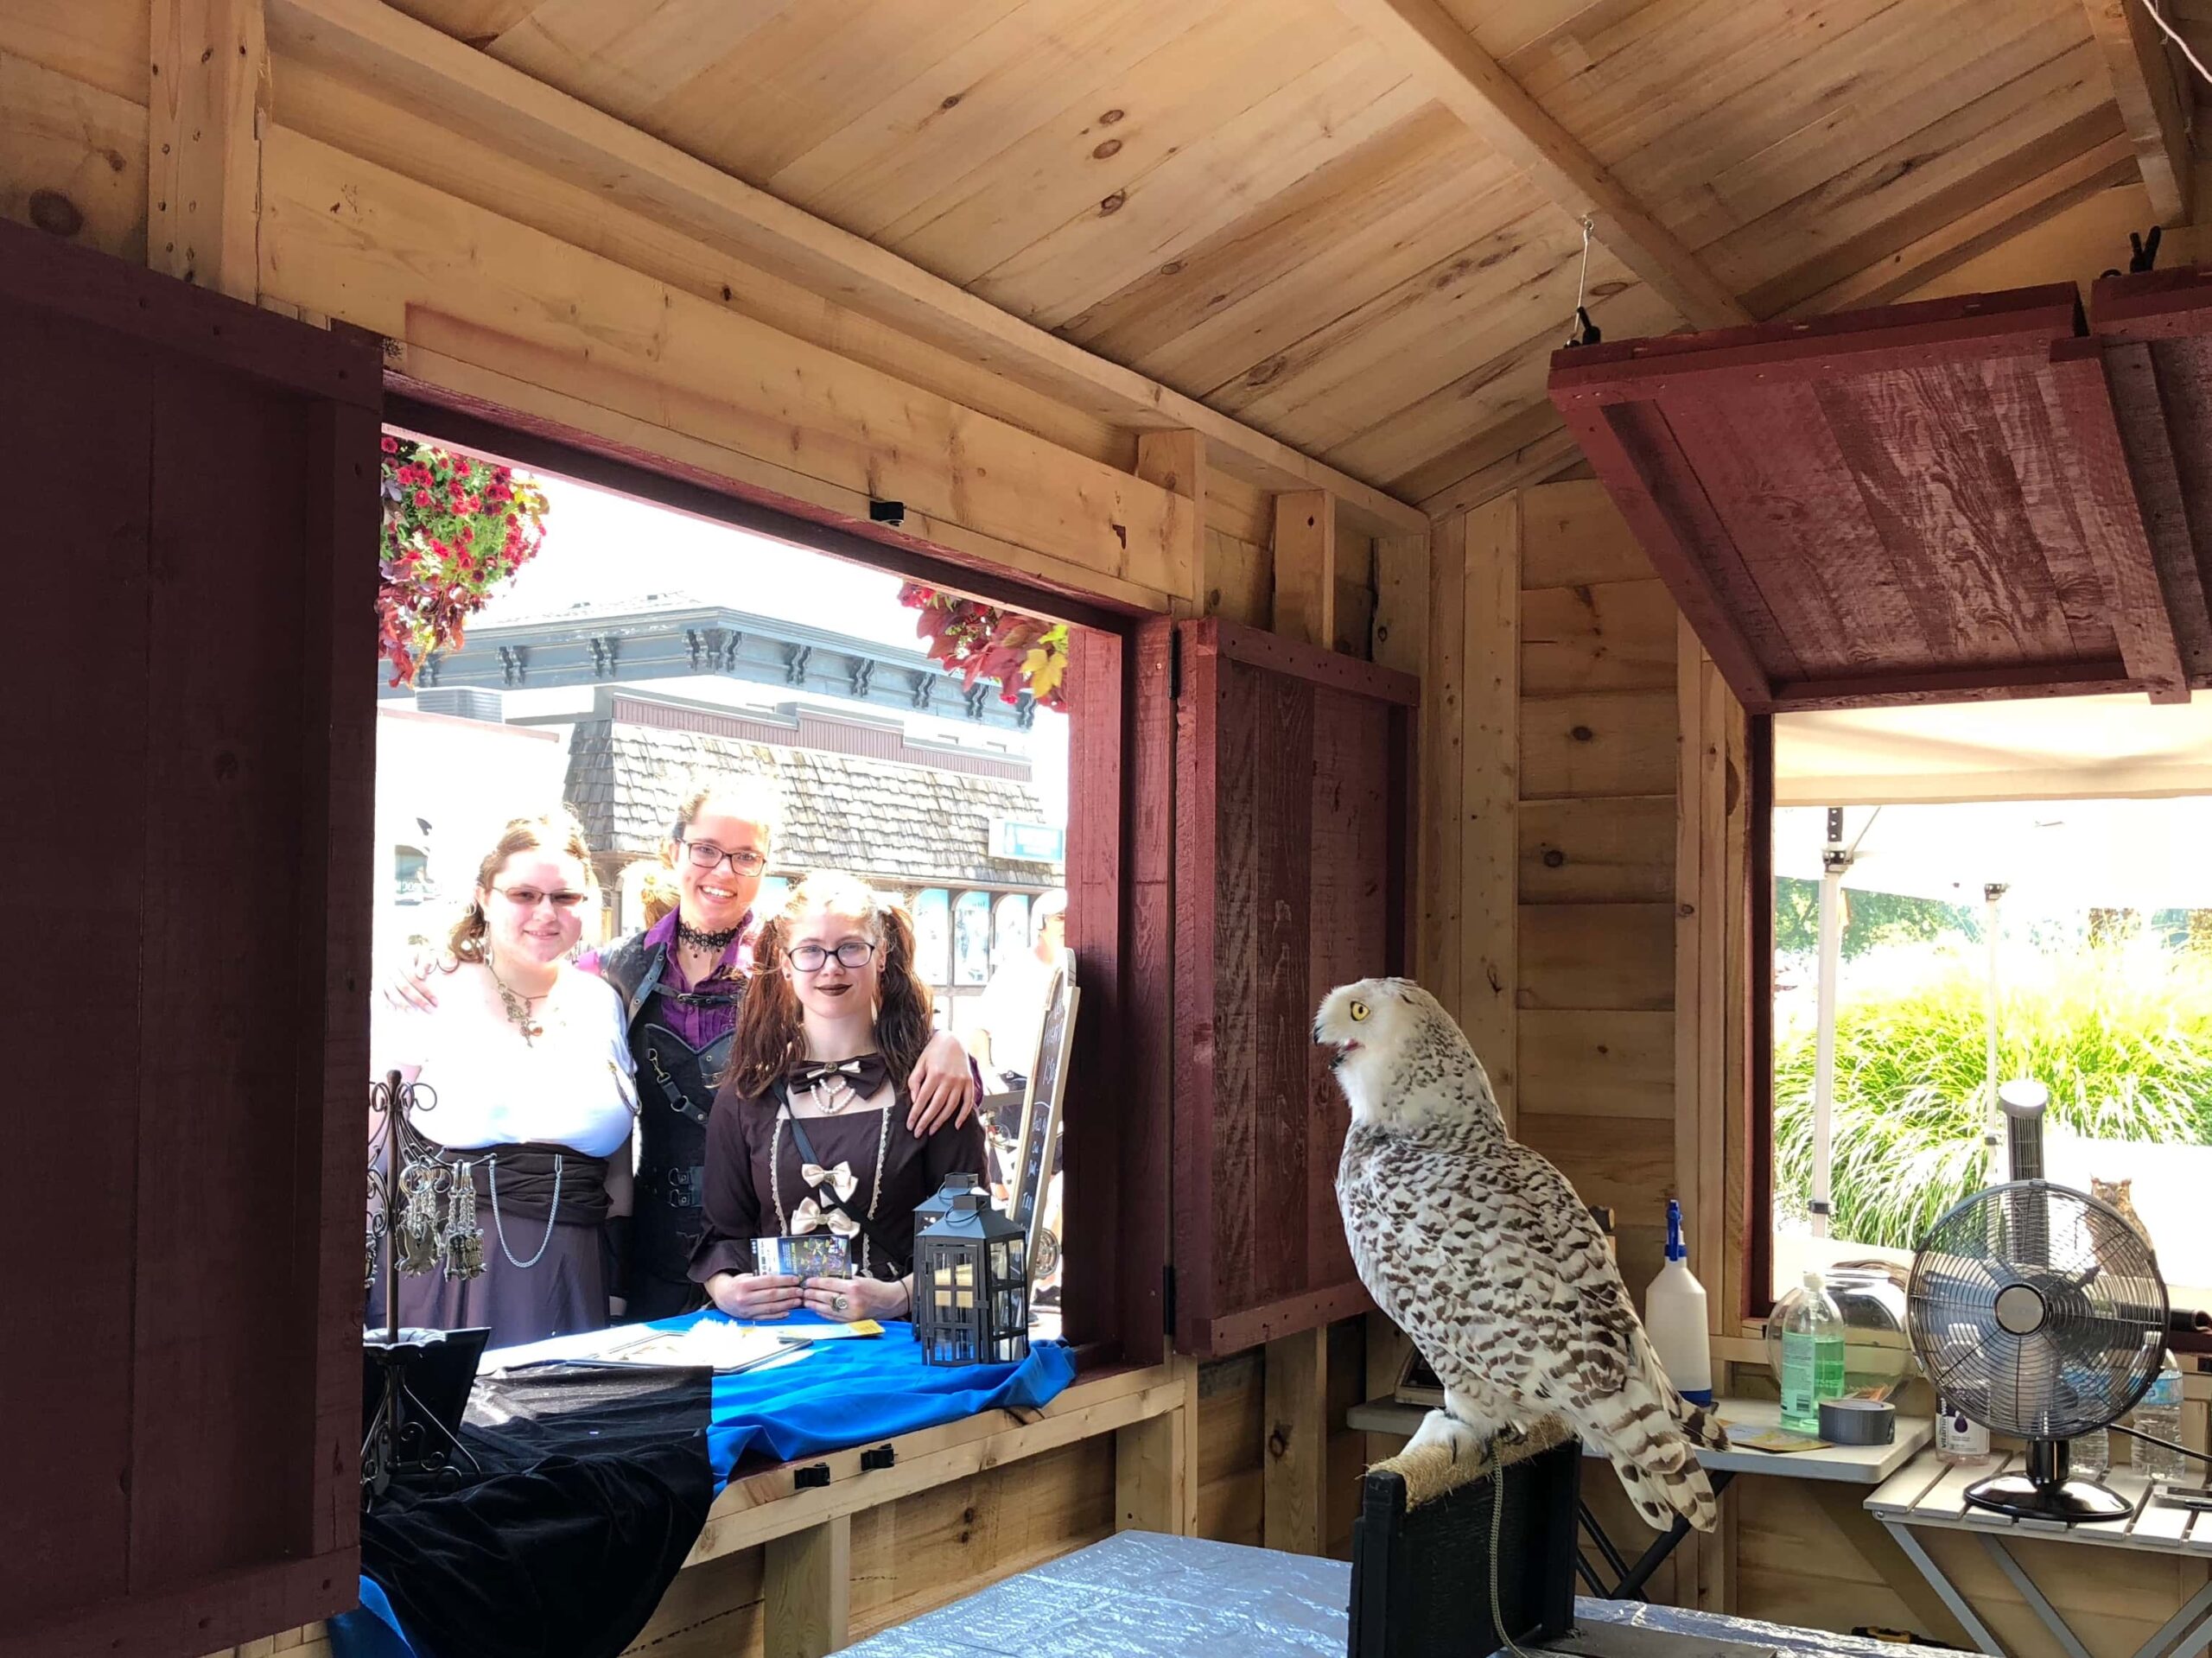 Three festival visitors admire an owl on display.